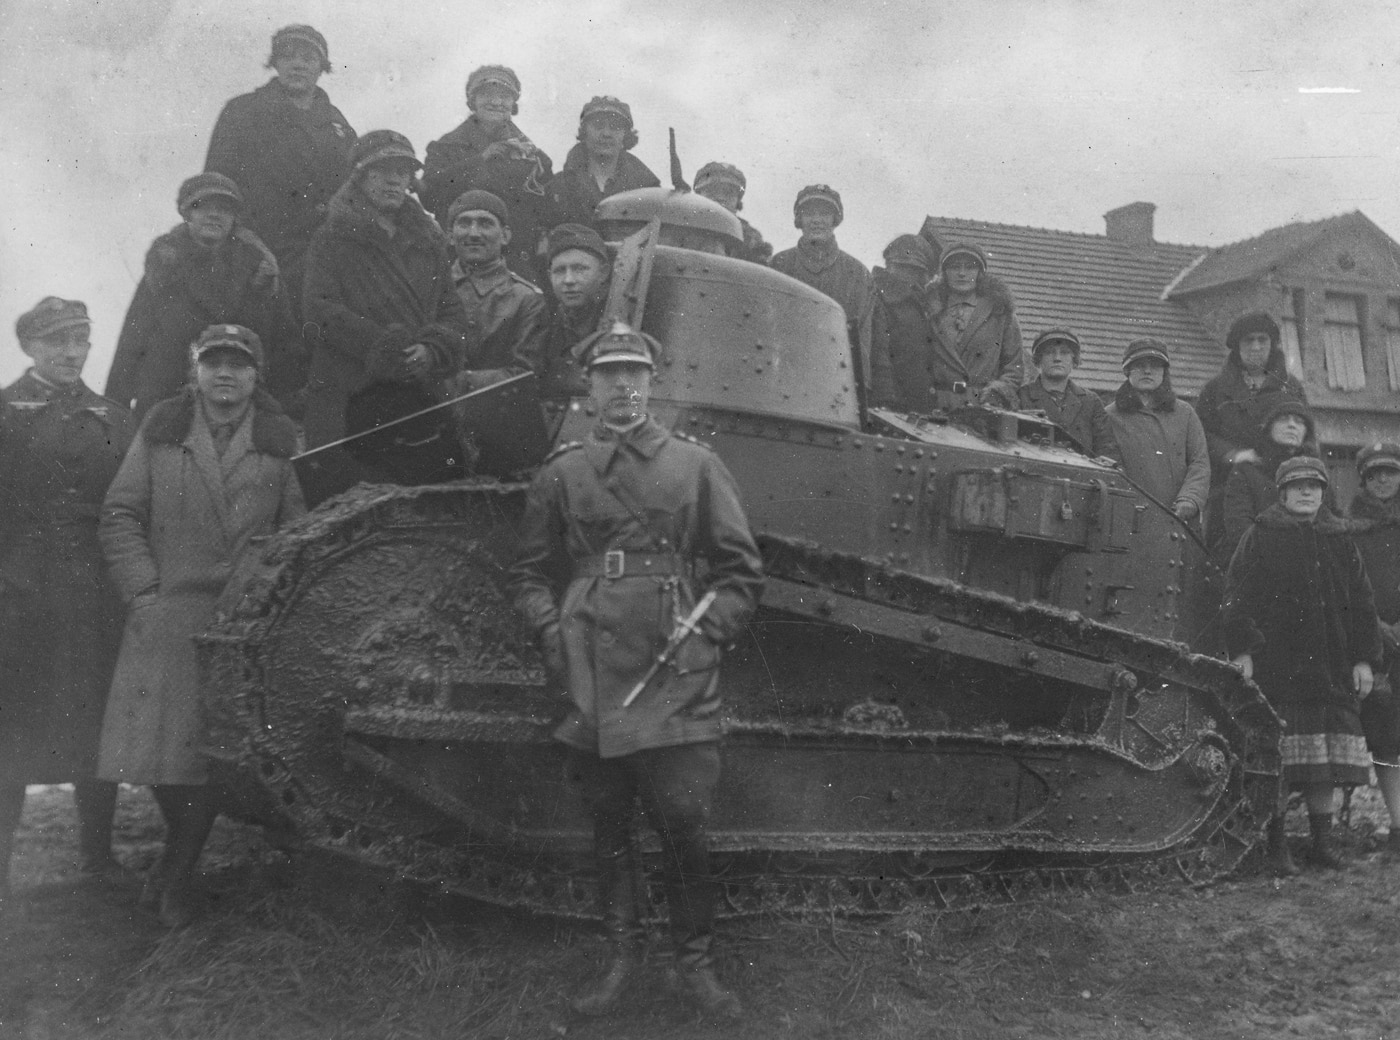 Polish women in a shooting class pose for a photo with the FT-17 tank